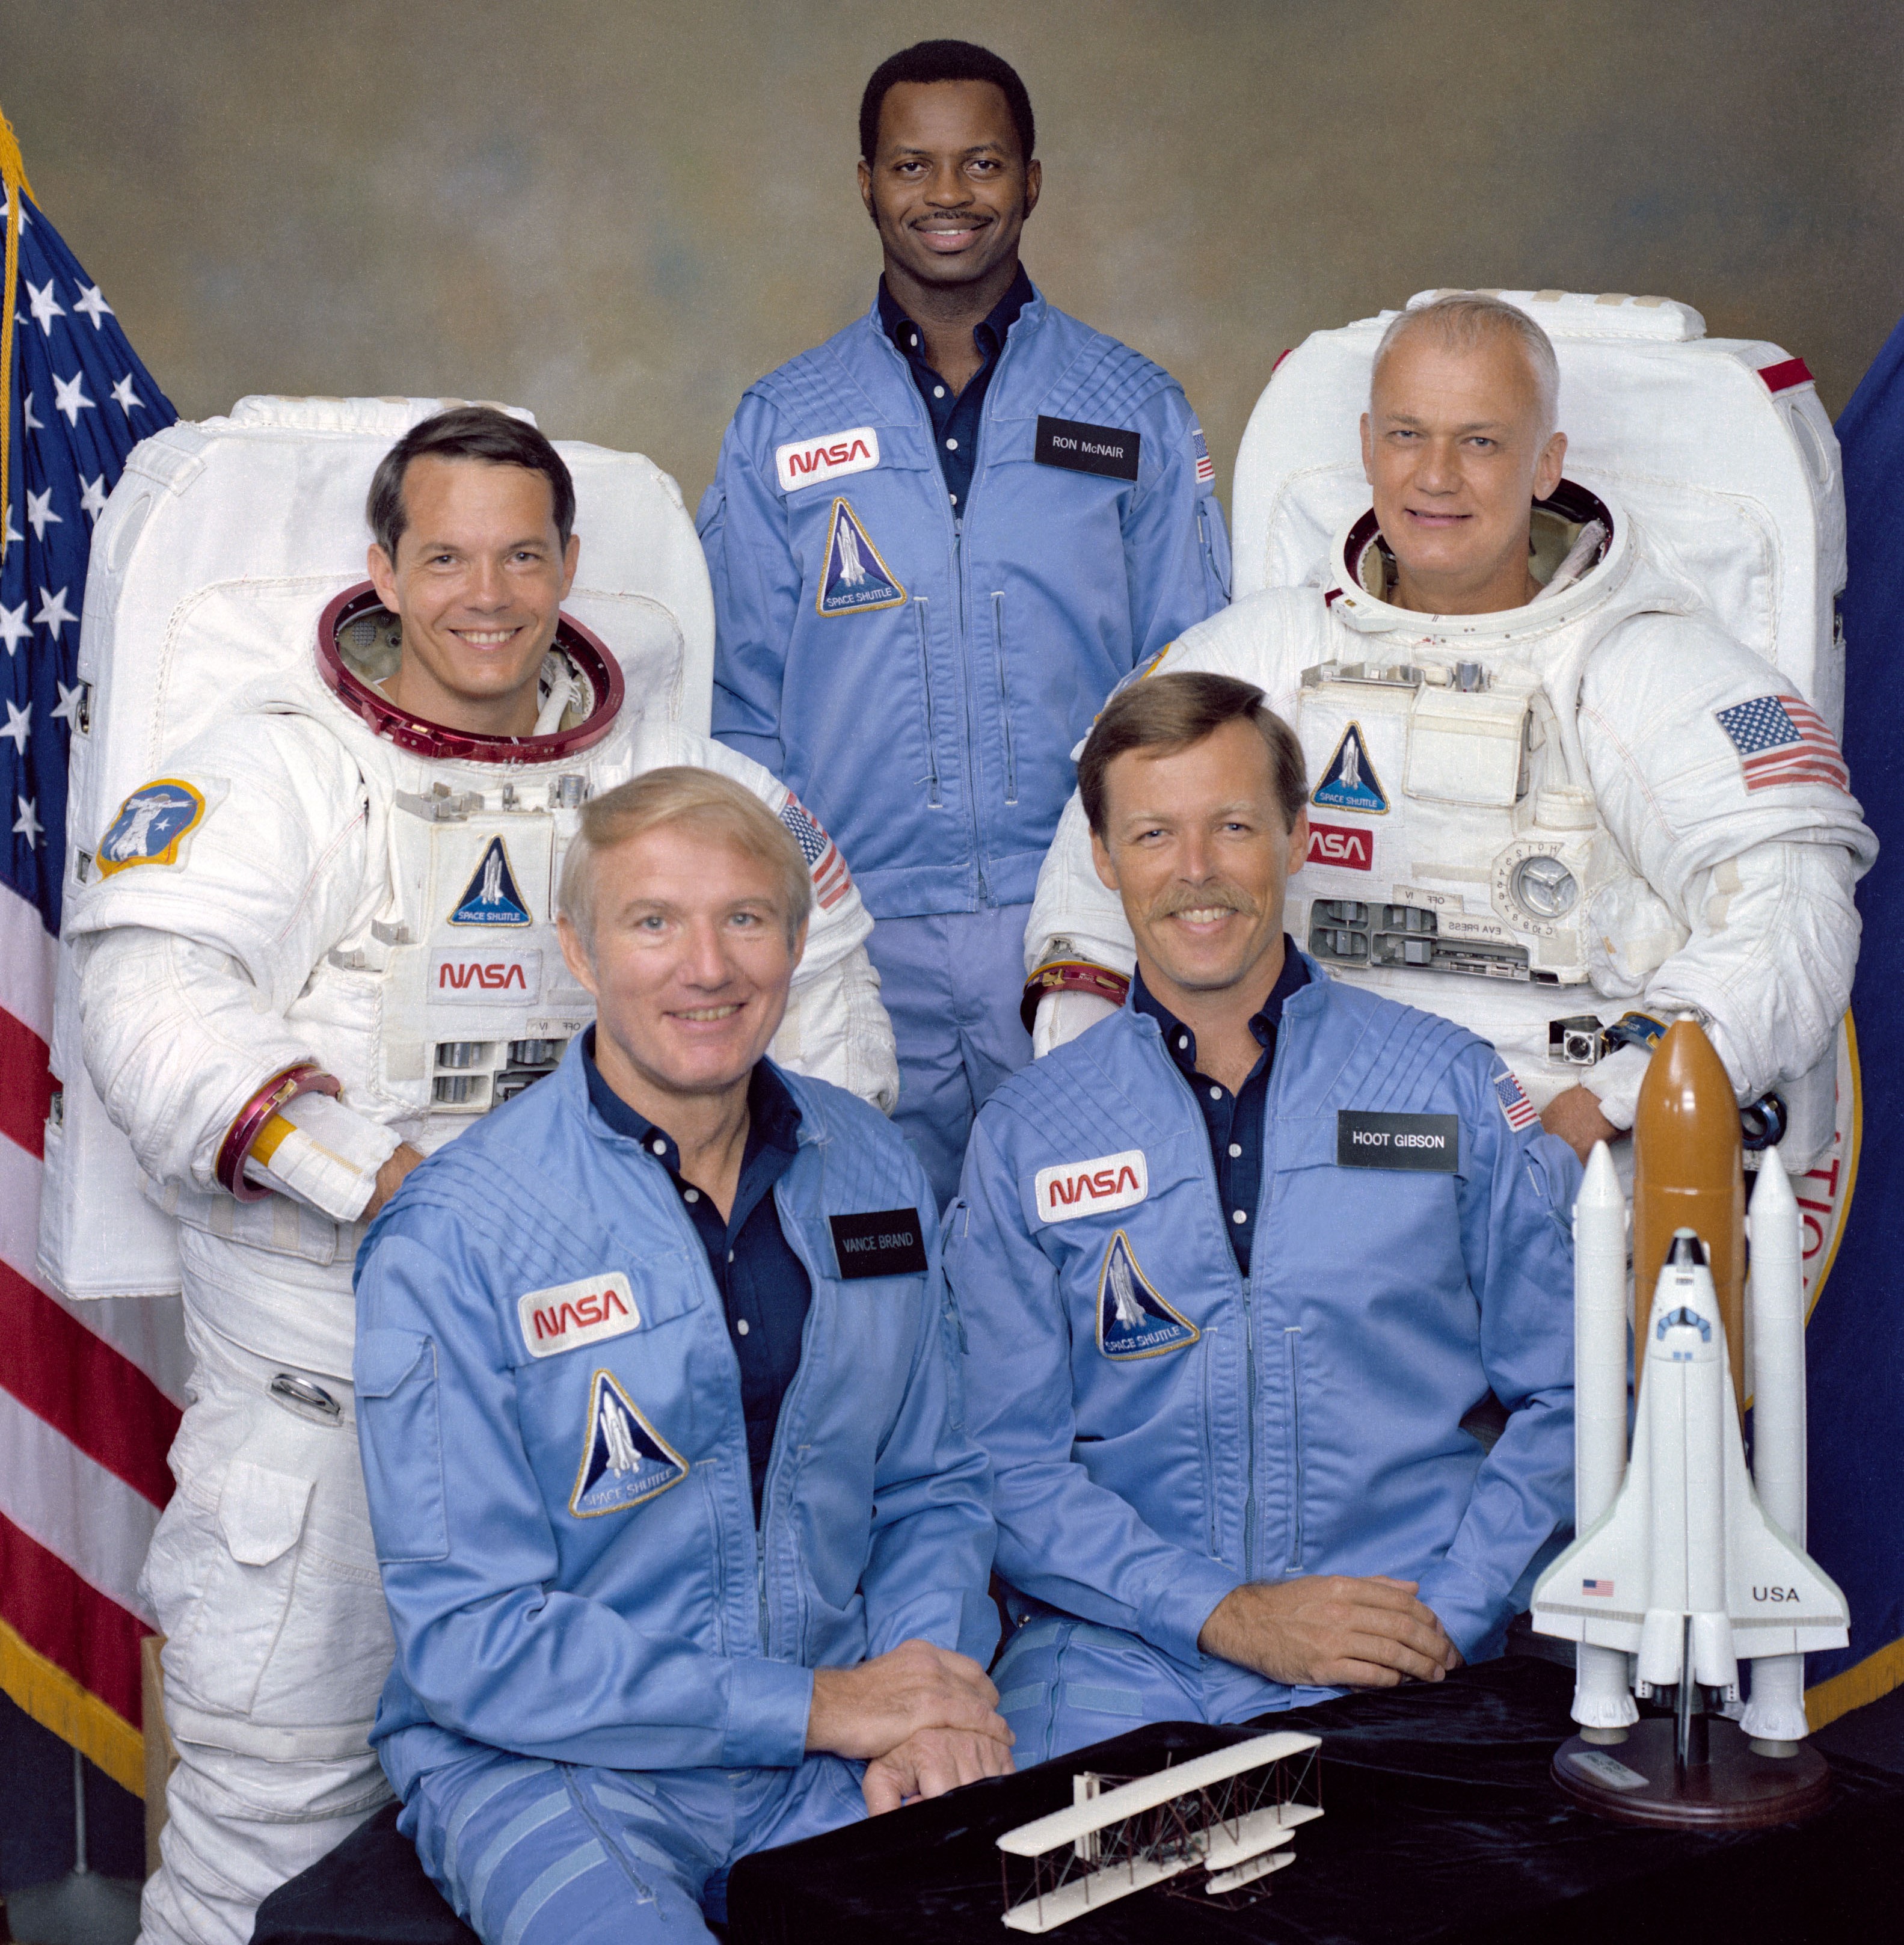 The STS-41B crew of Commander Vance D. Brand, Mission Specialists Robert L. Stewart, Ronald E. McNair, and Bruce McCandless, and Pilot Robert L. “Hoot” Gibson